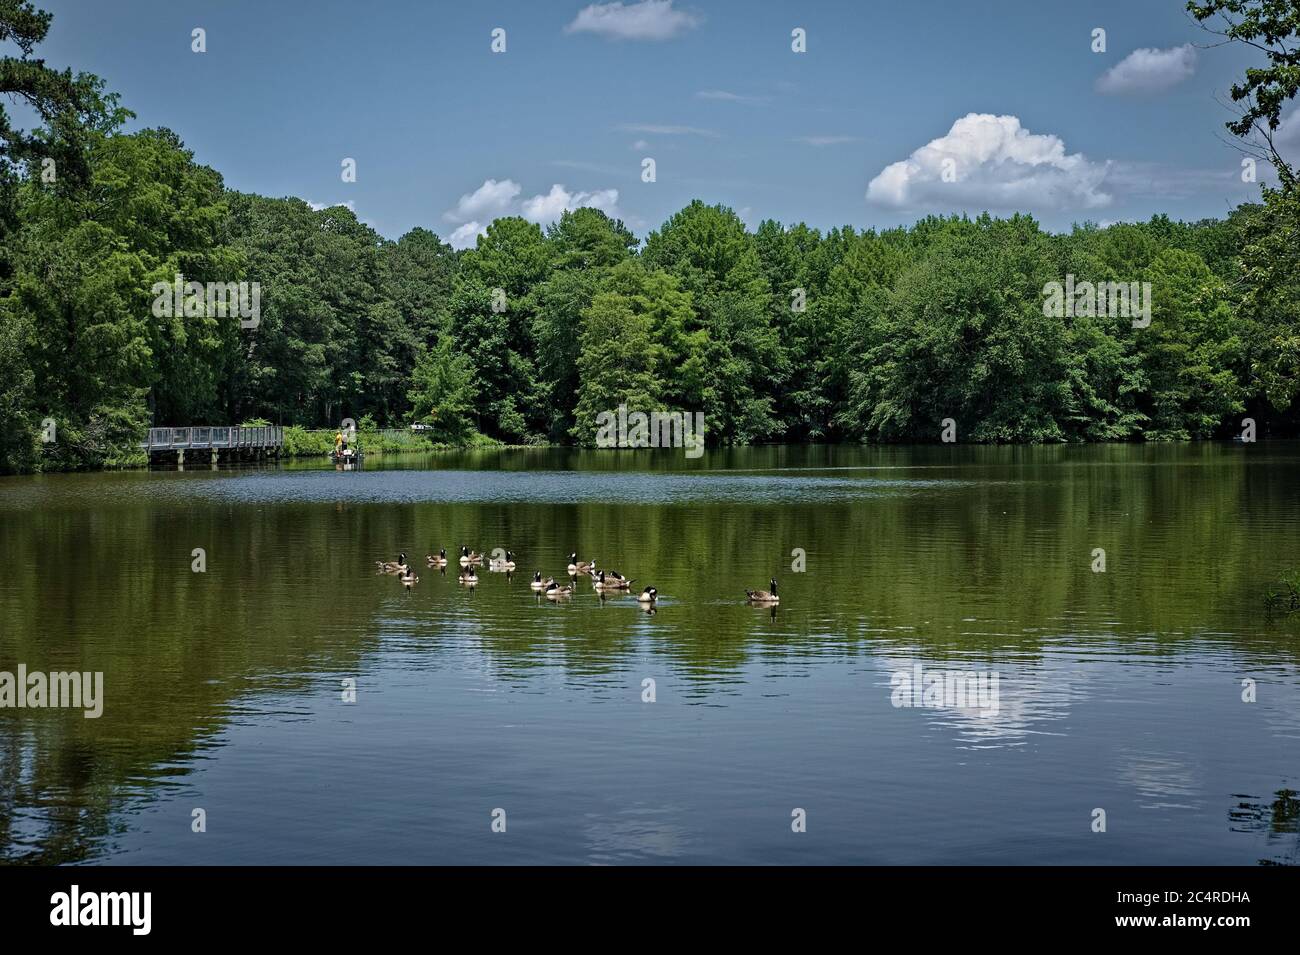 Lake view with geese swimming on a sunny day, Trap Pond, DE. Stock Photo